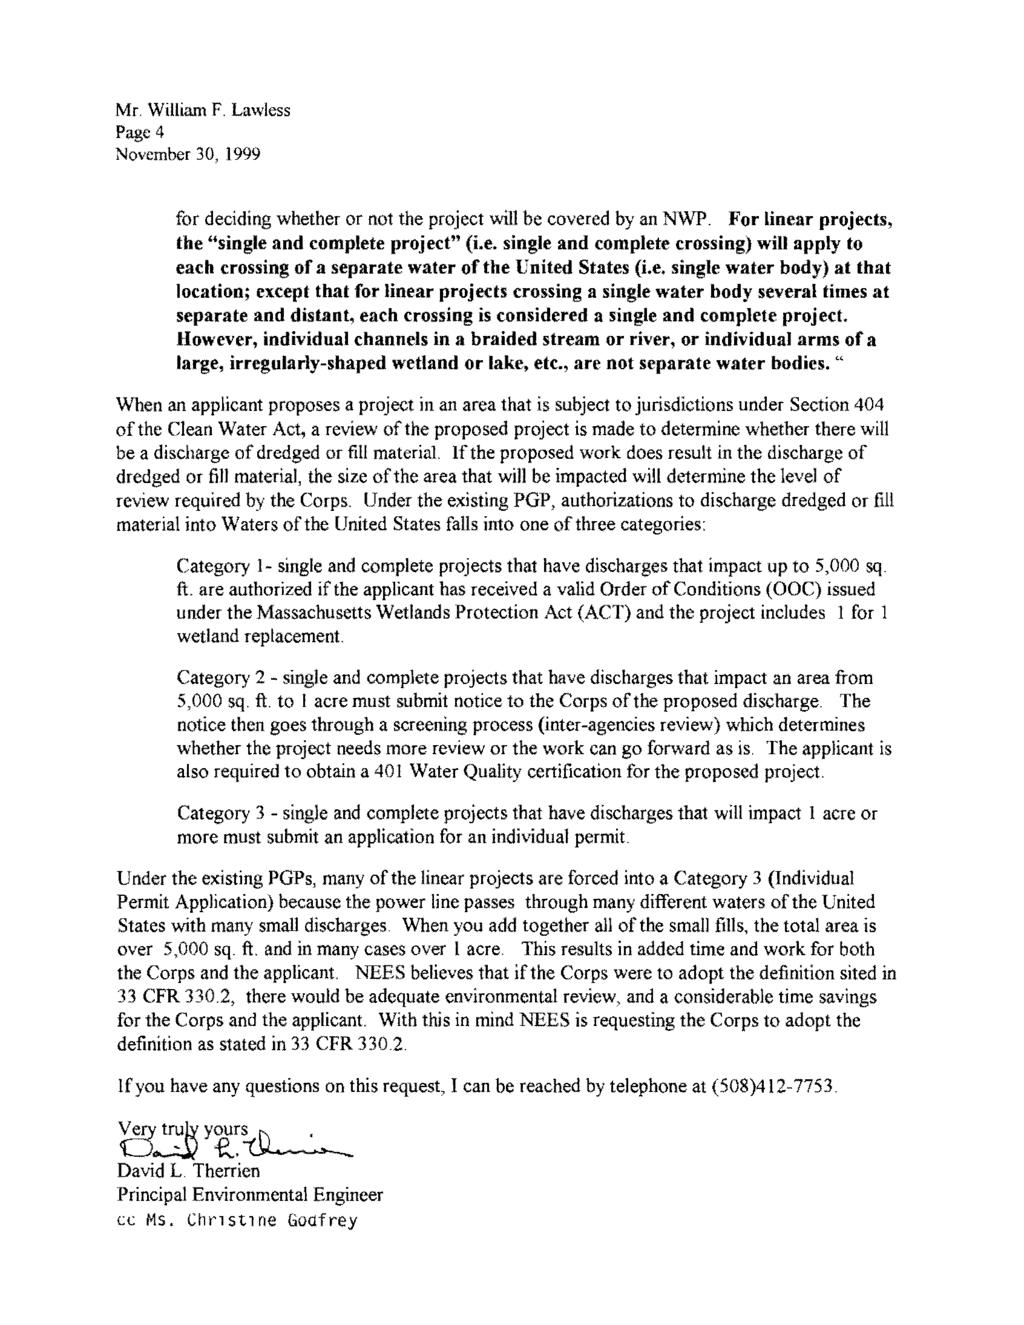 Mr. William F. Lawless Page 4 November 30, 1999 for deciding whether or not the project will be covered by an NWP. For linear projects, the "single and complete project" (i.e. single and complete crossing) will apply to each crossing of a separate water ofthe United States (i.